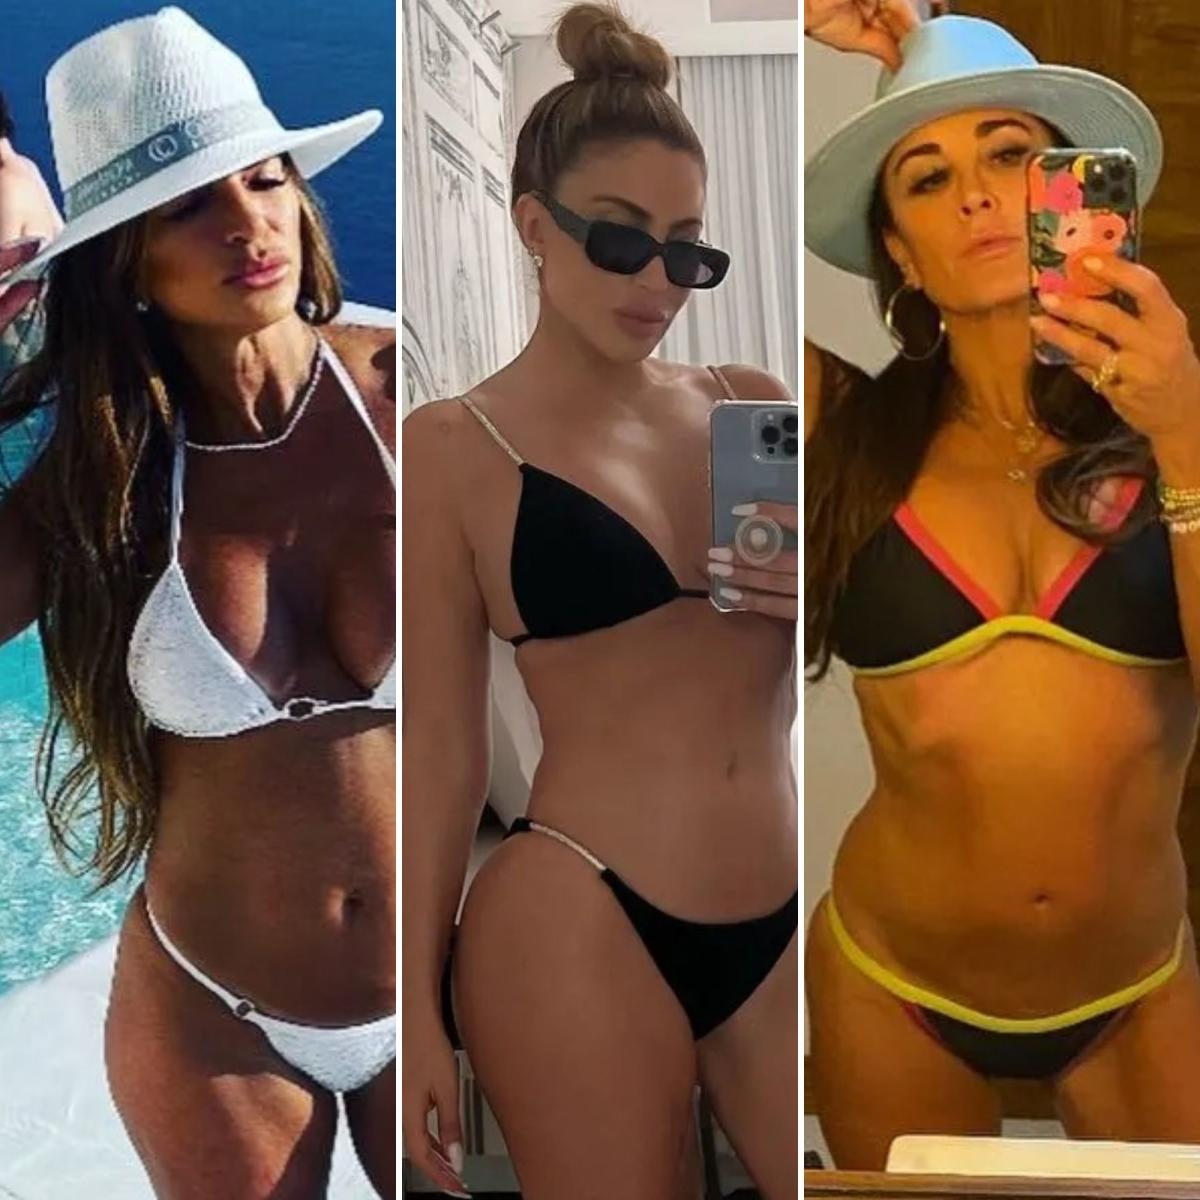 These Real Housewives Stars Are Seriously Hot See Their Best Bikini Moments Over the Years! image